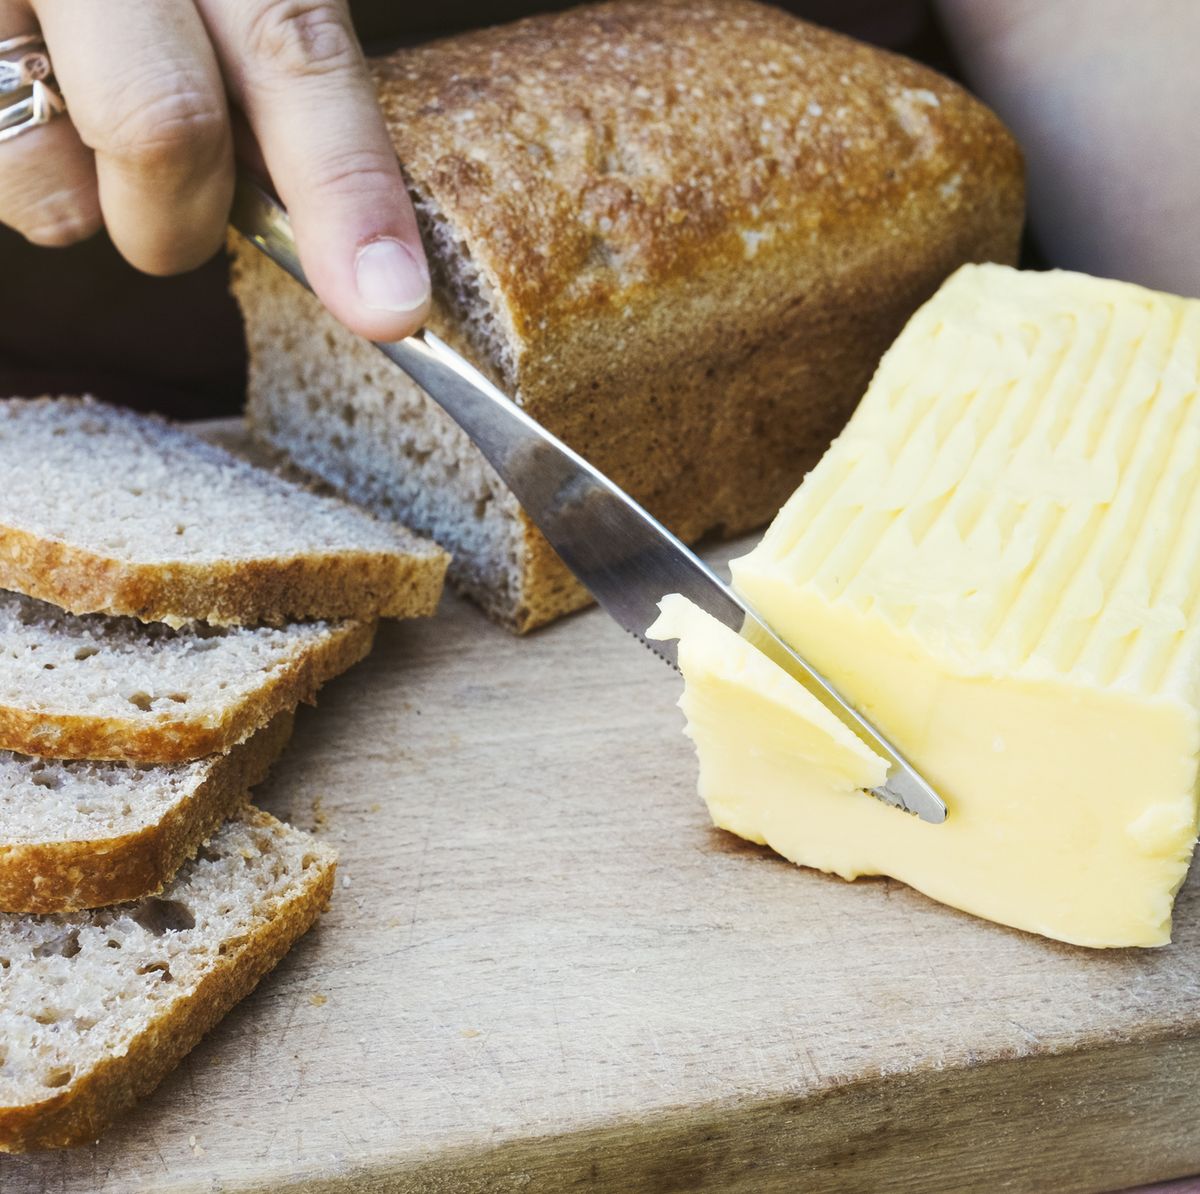 A person with a knife slicing through a block of butter for a sliced bread loaf.